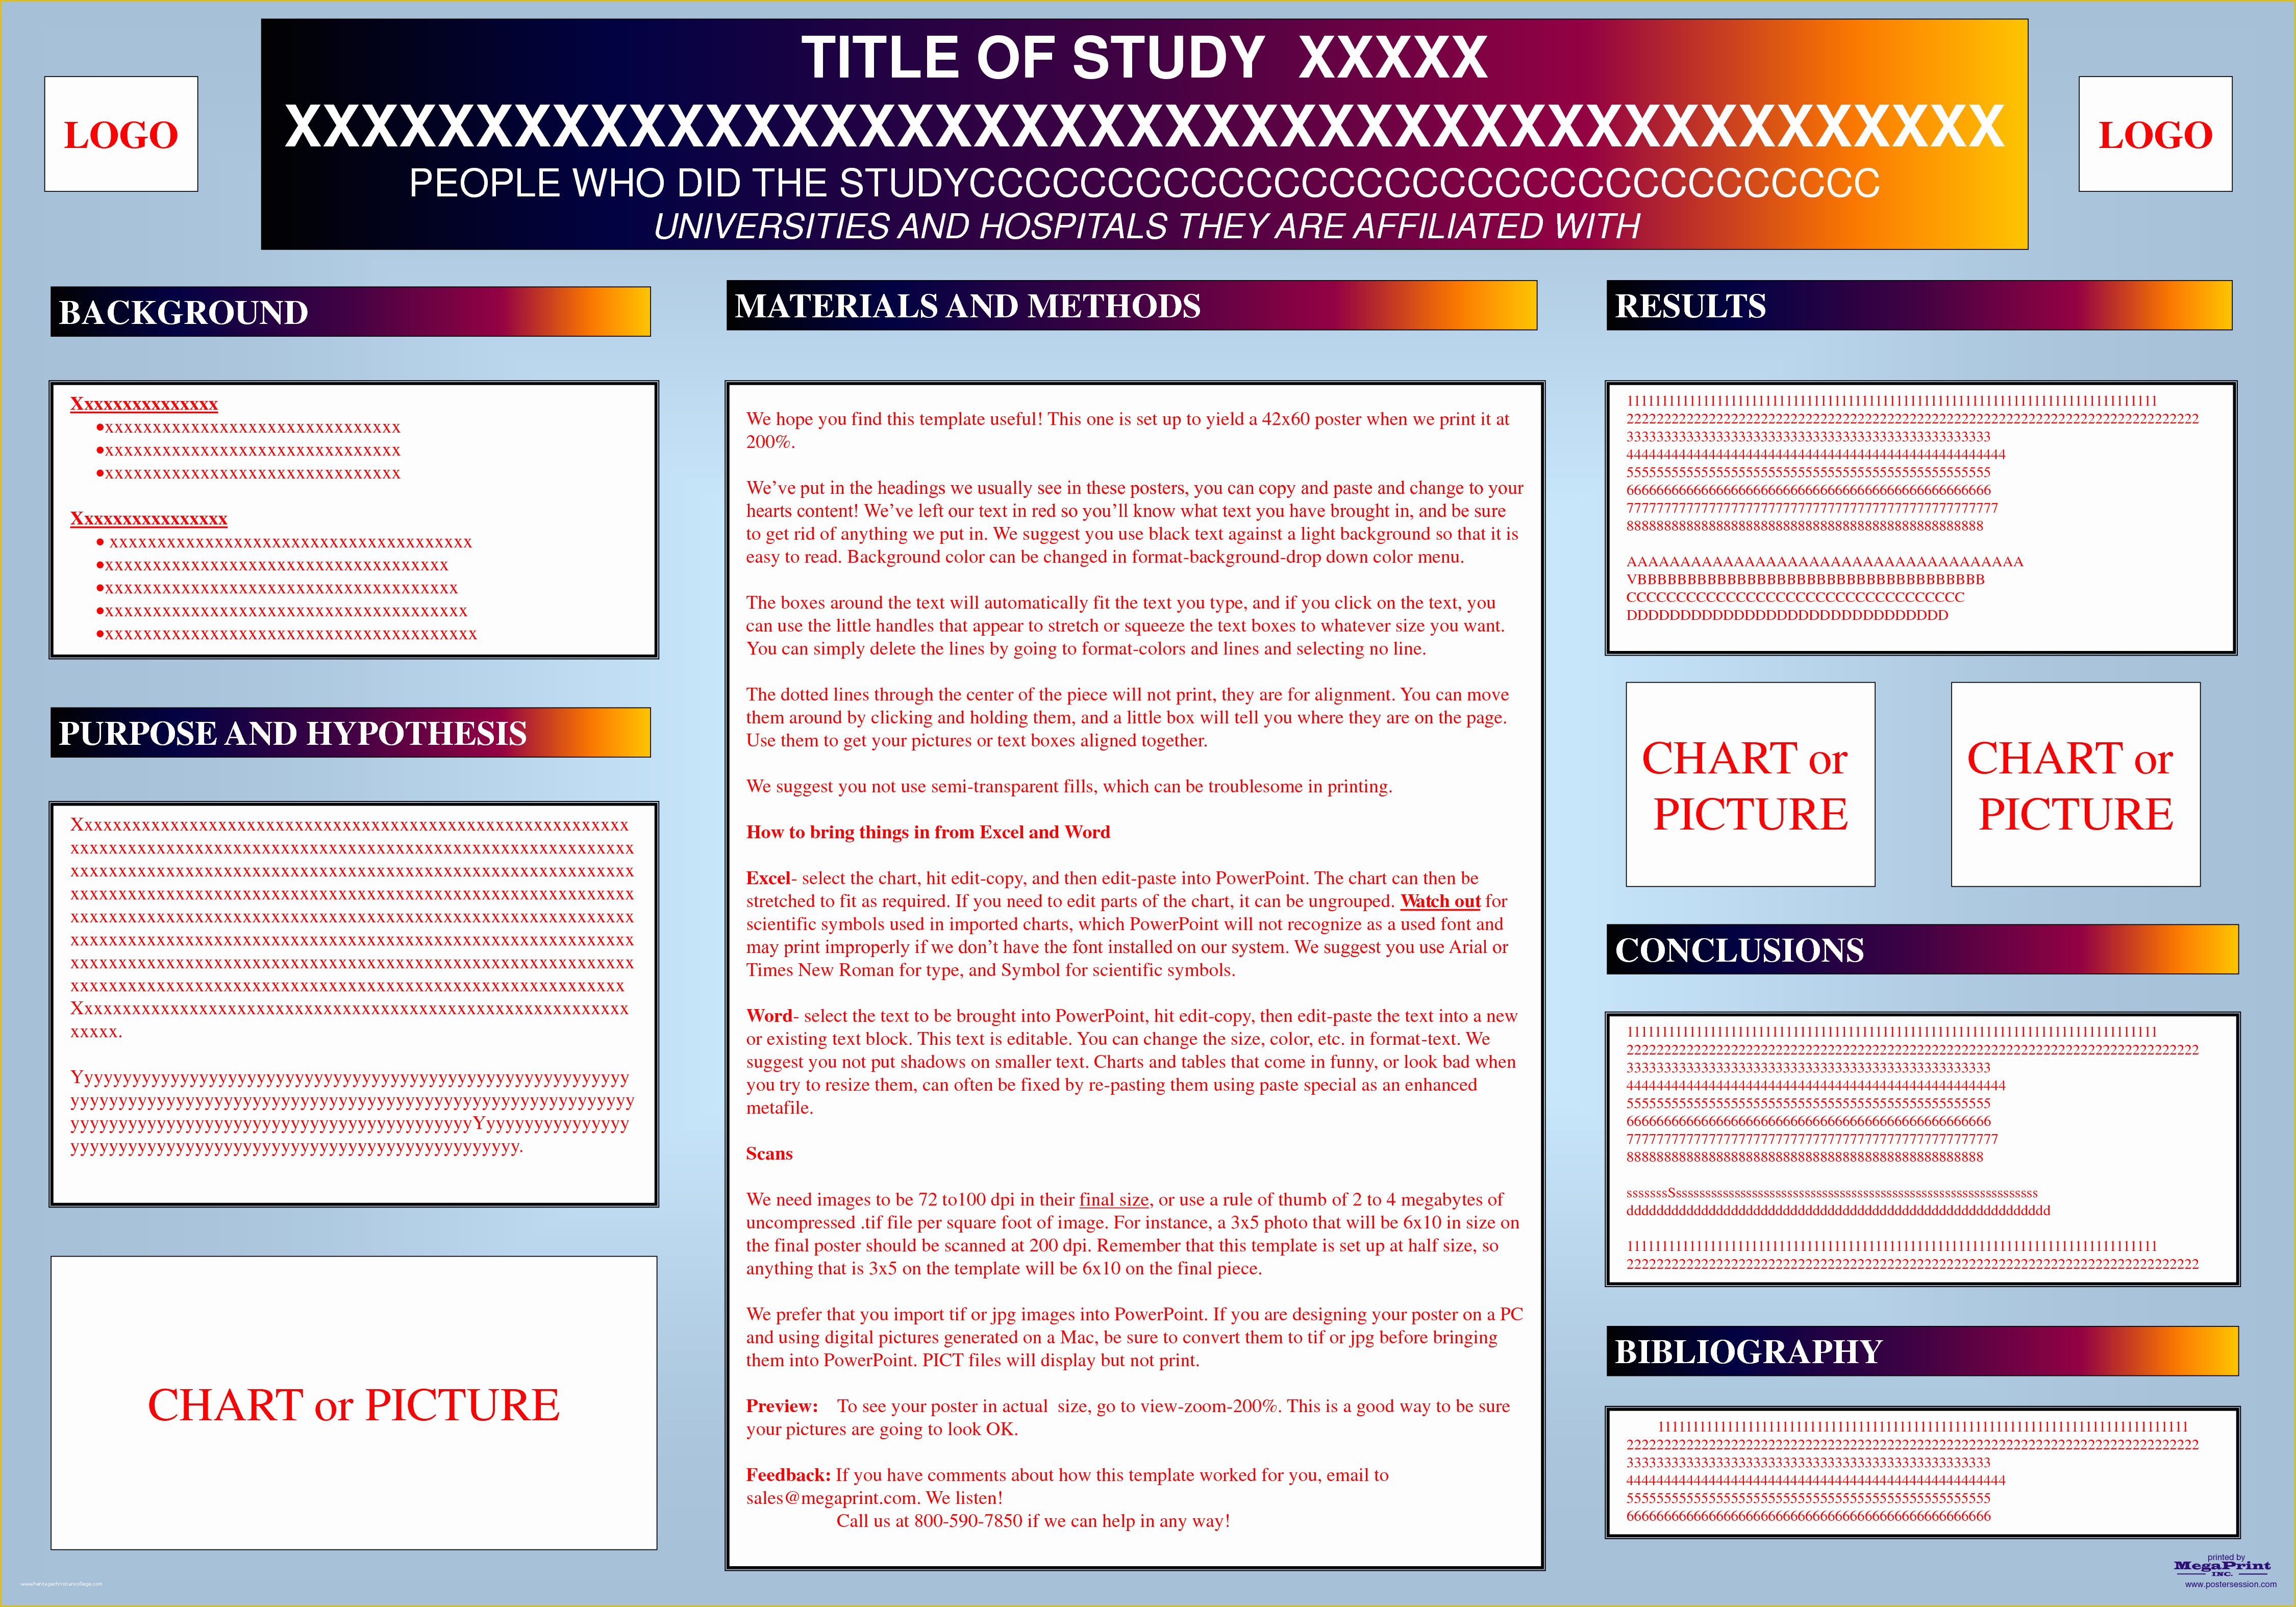 Poster Presentation Template Free Download Of 7 Best Of Academic Research Poster Presentation